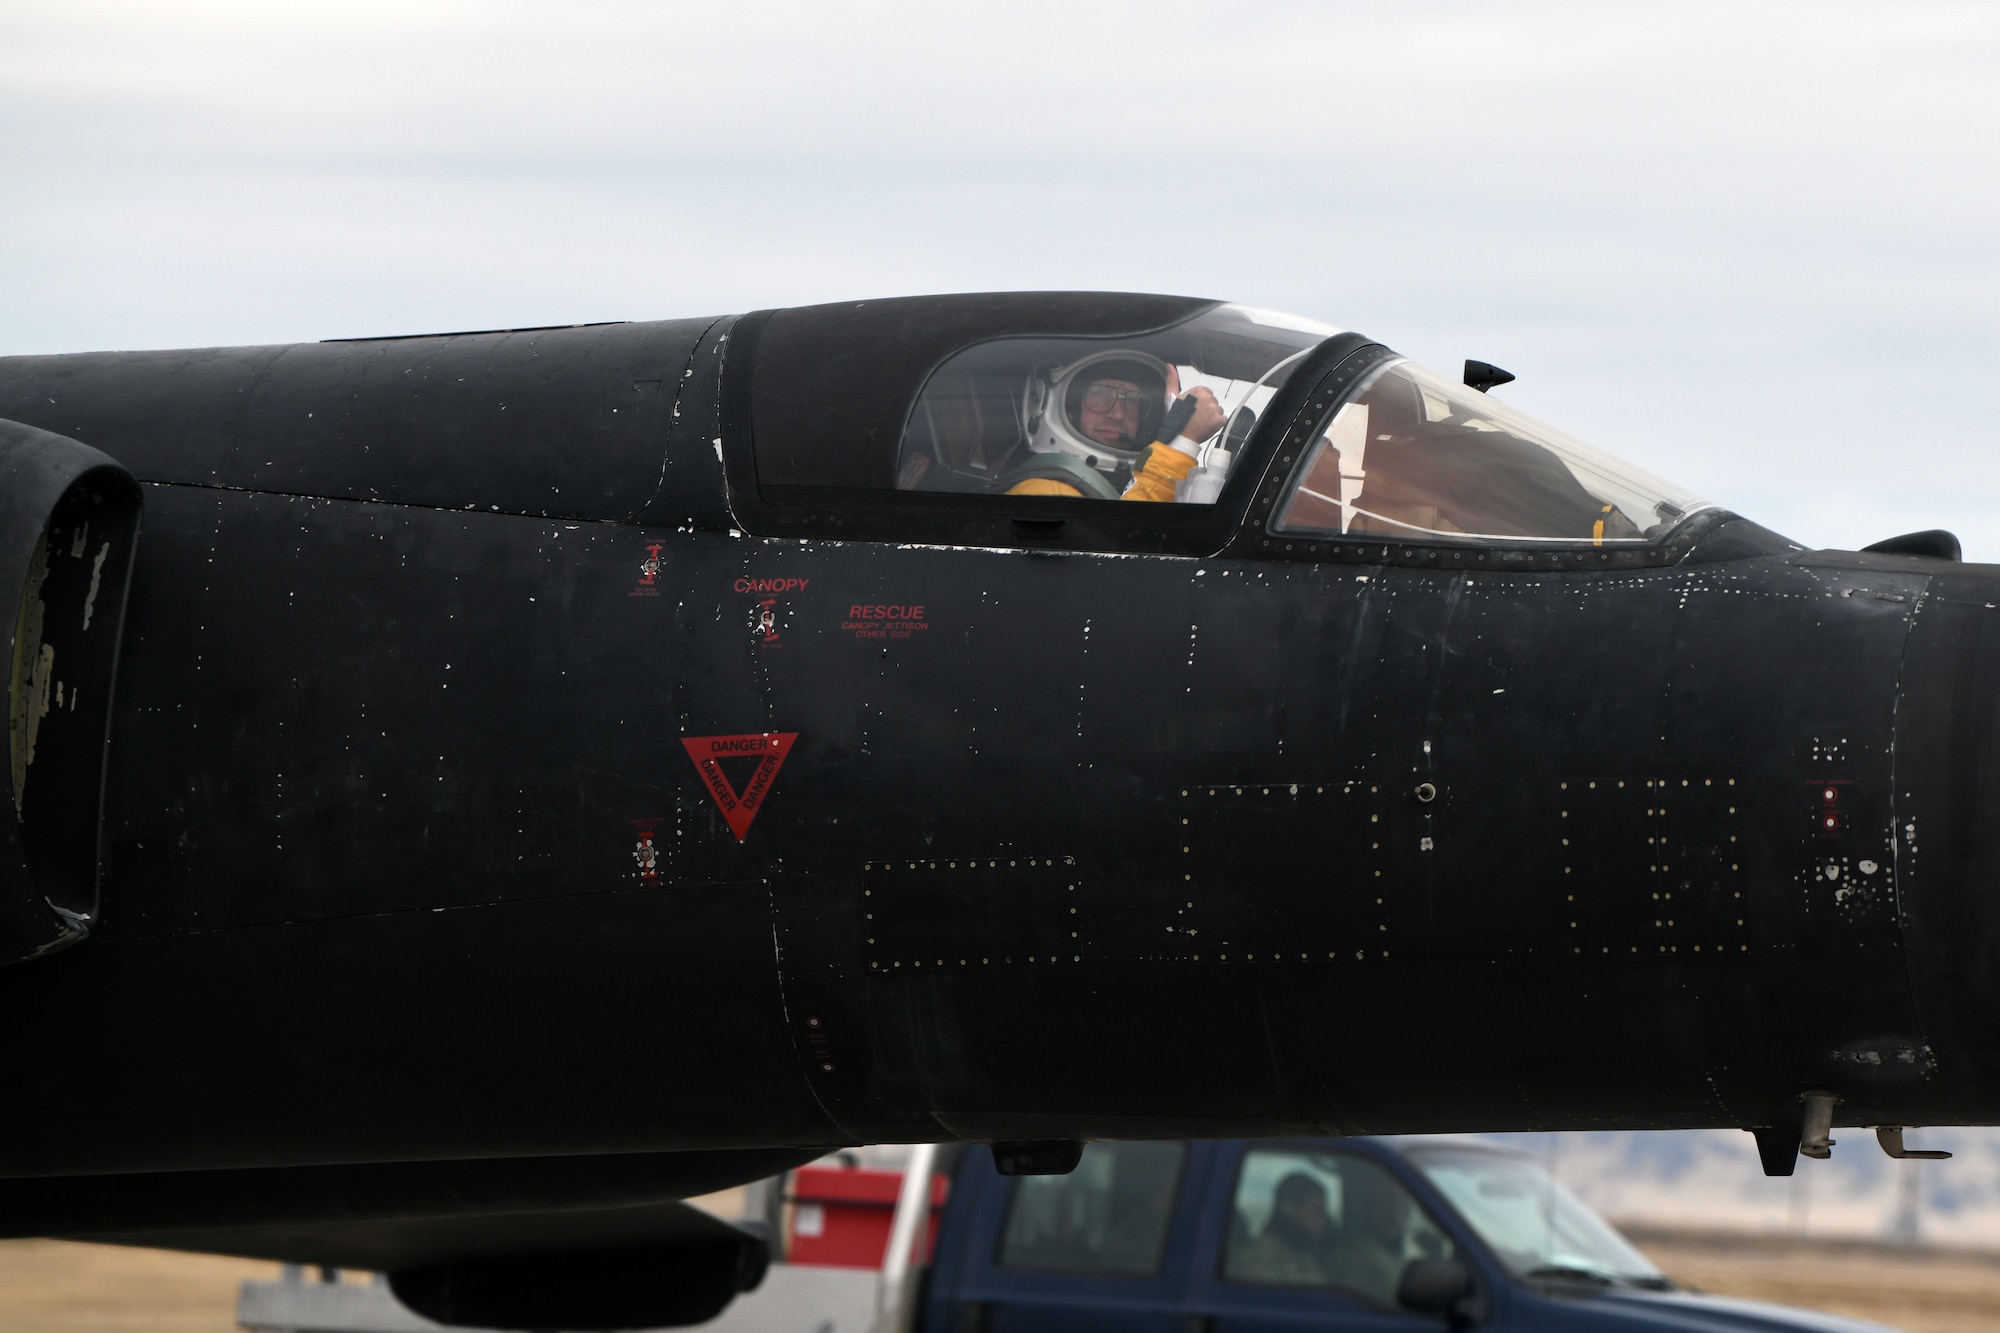 Maj. “Vudu”, a U-2 Dragon Lady pilot assigned to the 9th Reconnaissance Wing, prepares to taxi after returning from a training sortie at Beale Air Force, Calif., Dec. 15, 2020. This flight marks a major leap forward for national defense as artificial intelligence took flight aboard a military aircraft for the first time in the history of the Department of Defense. The AI algorithm, developed by Air Combat Command’s U-2 Federal Laboratory, trained the AI to execute specific in-flight tasks that would otherwise be done by the pilot. The flight was part of a specifically constructed scenario pitting the AI against another dynamic computer algorithm in order to prove both the new technology capability, and its ability to work in coordination with a human. (U.S. Air Force photo by Airman 1st Class Luis A. Ruiz-Vazquez)